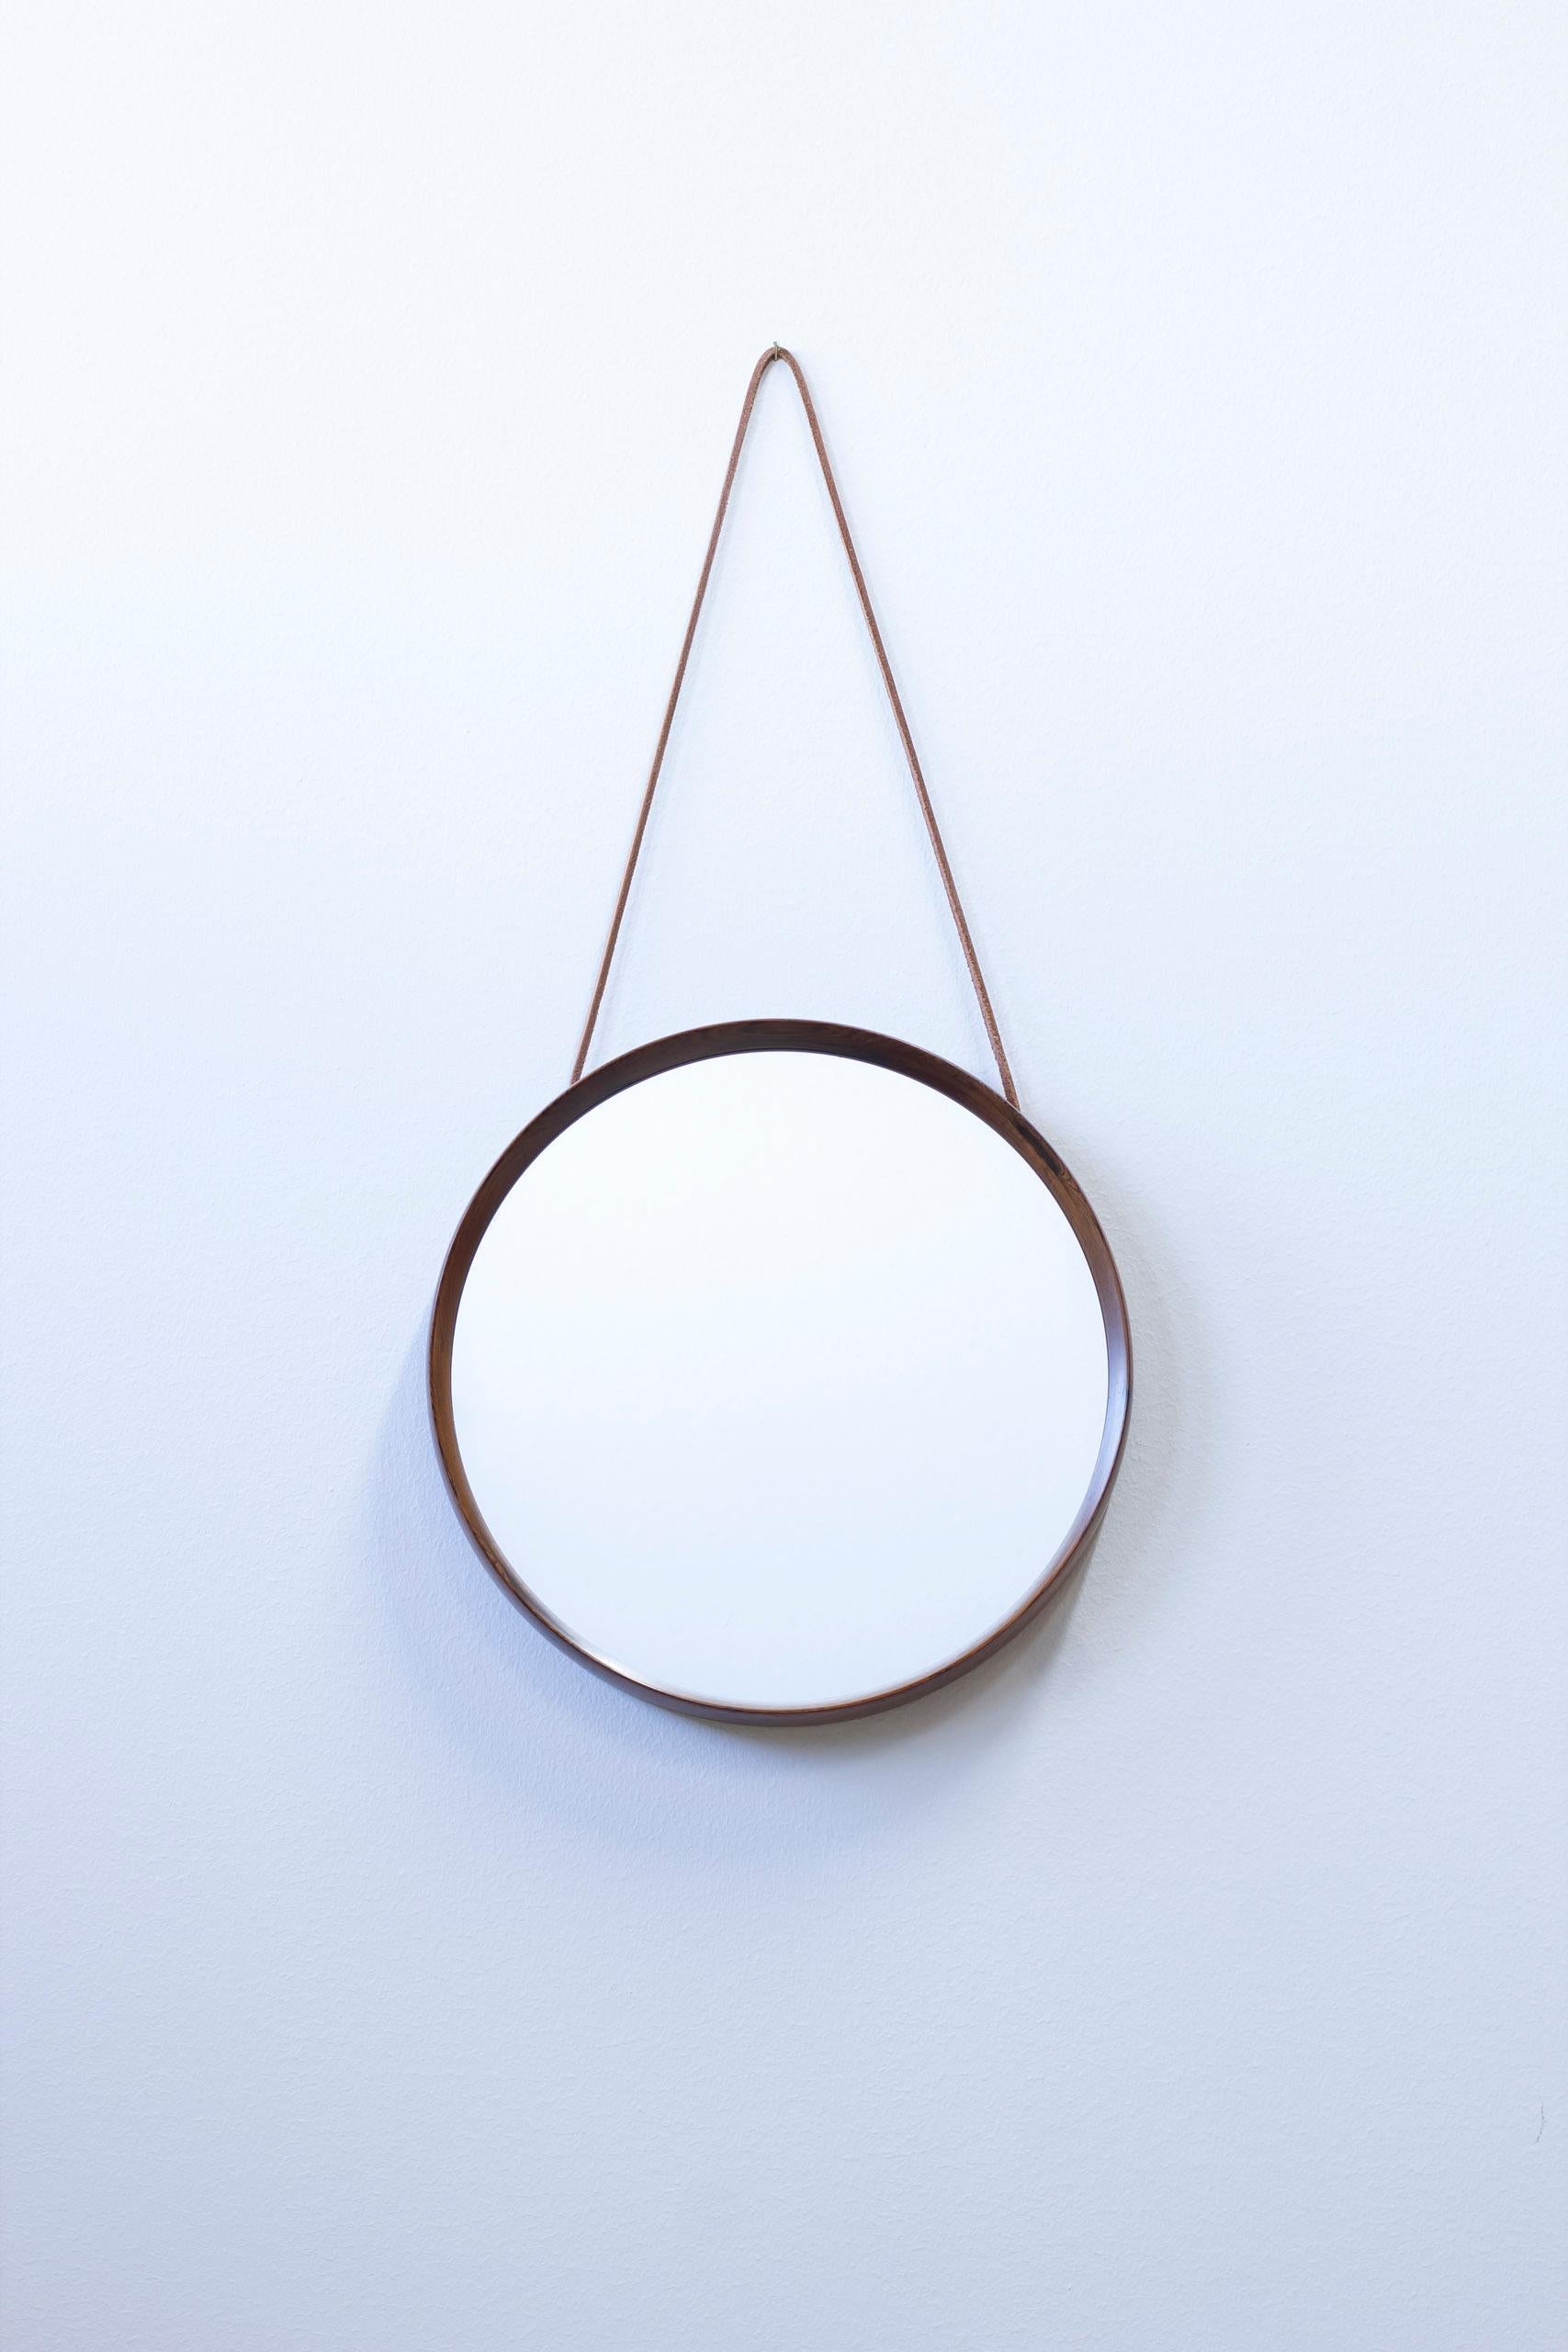 Wall mirror model 415 designed by Uno & Östen Kristiansson. Produced by Luxus in Sweden during the 1950s. rare small version. Made from solid rosewood and leather. Very good vintage condition with light age related wear and patina.

 

Come with